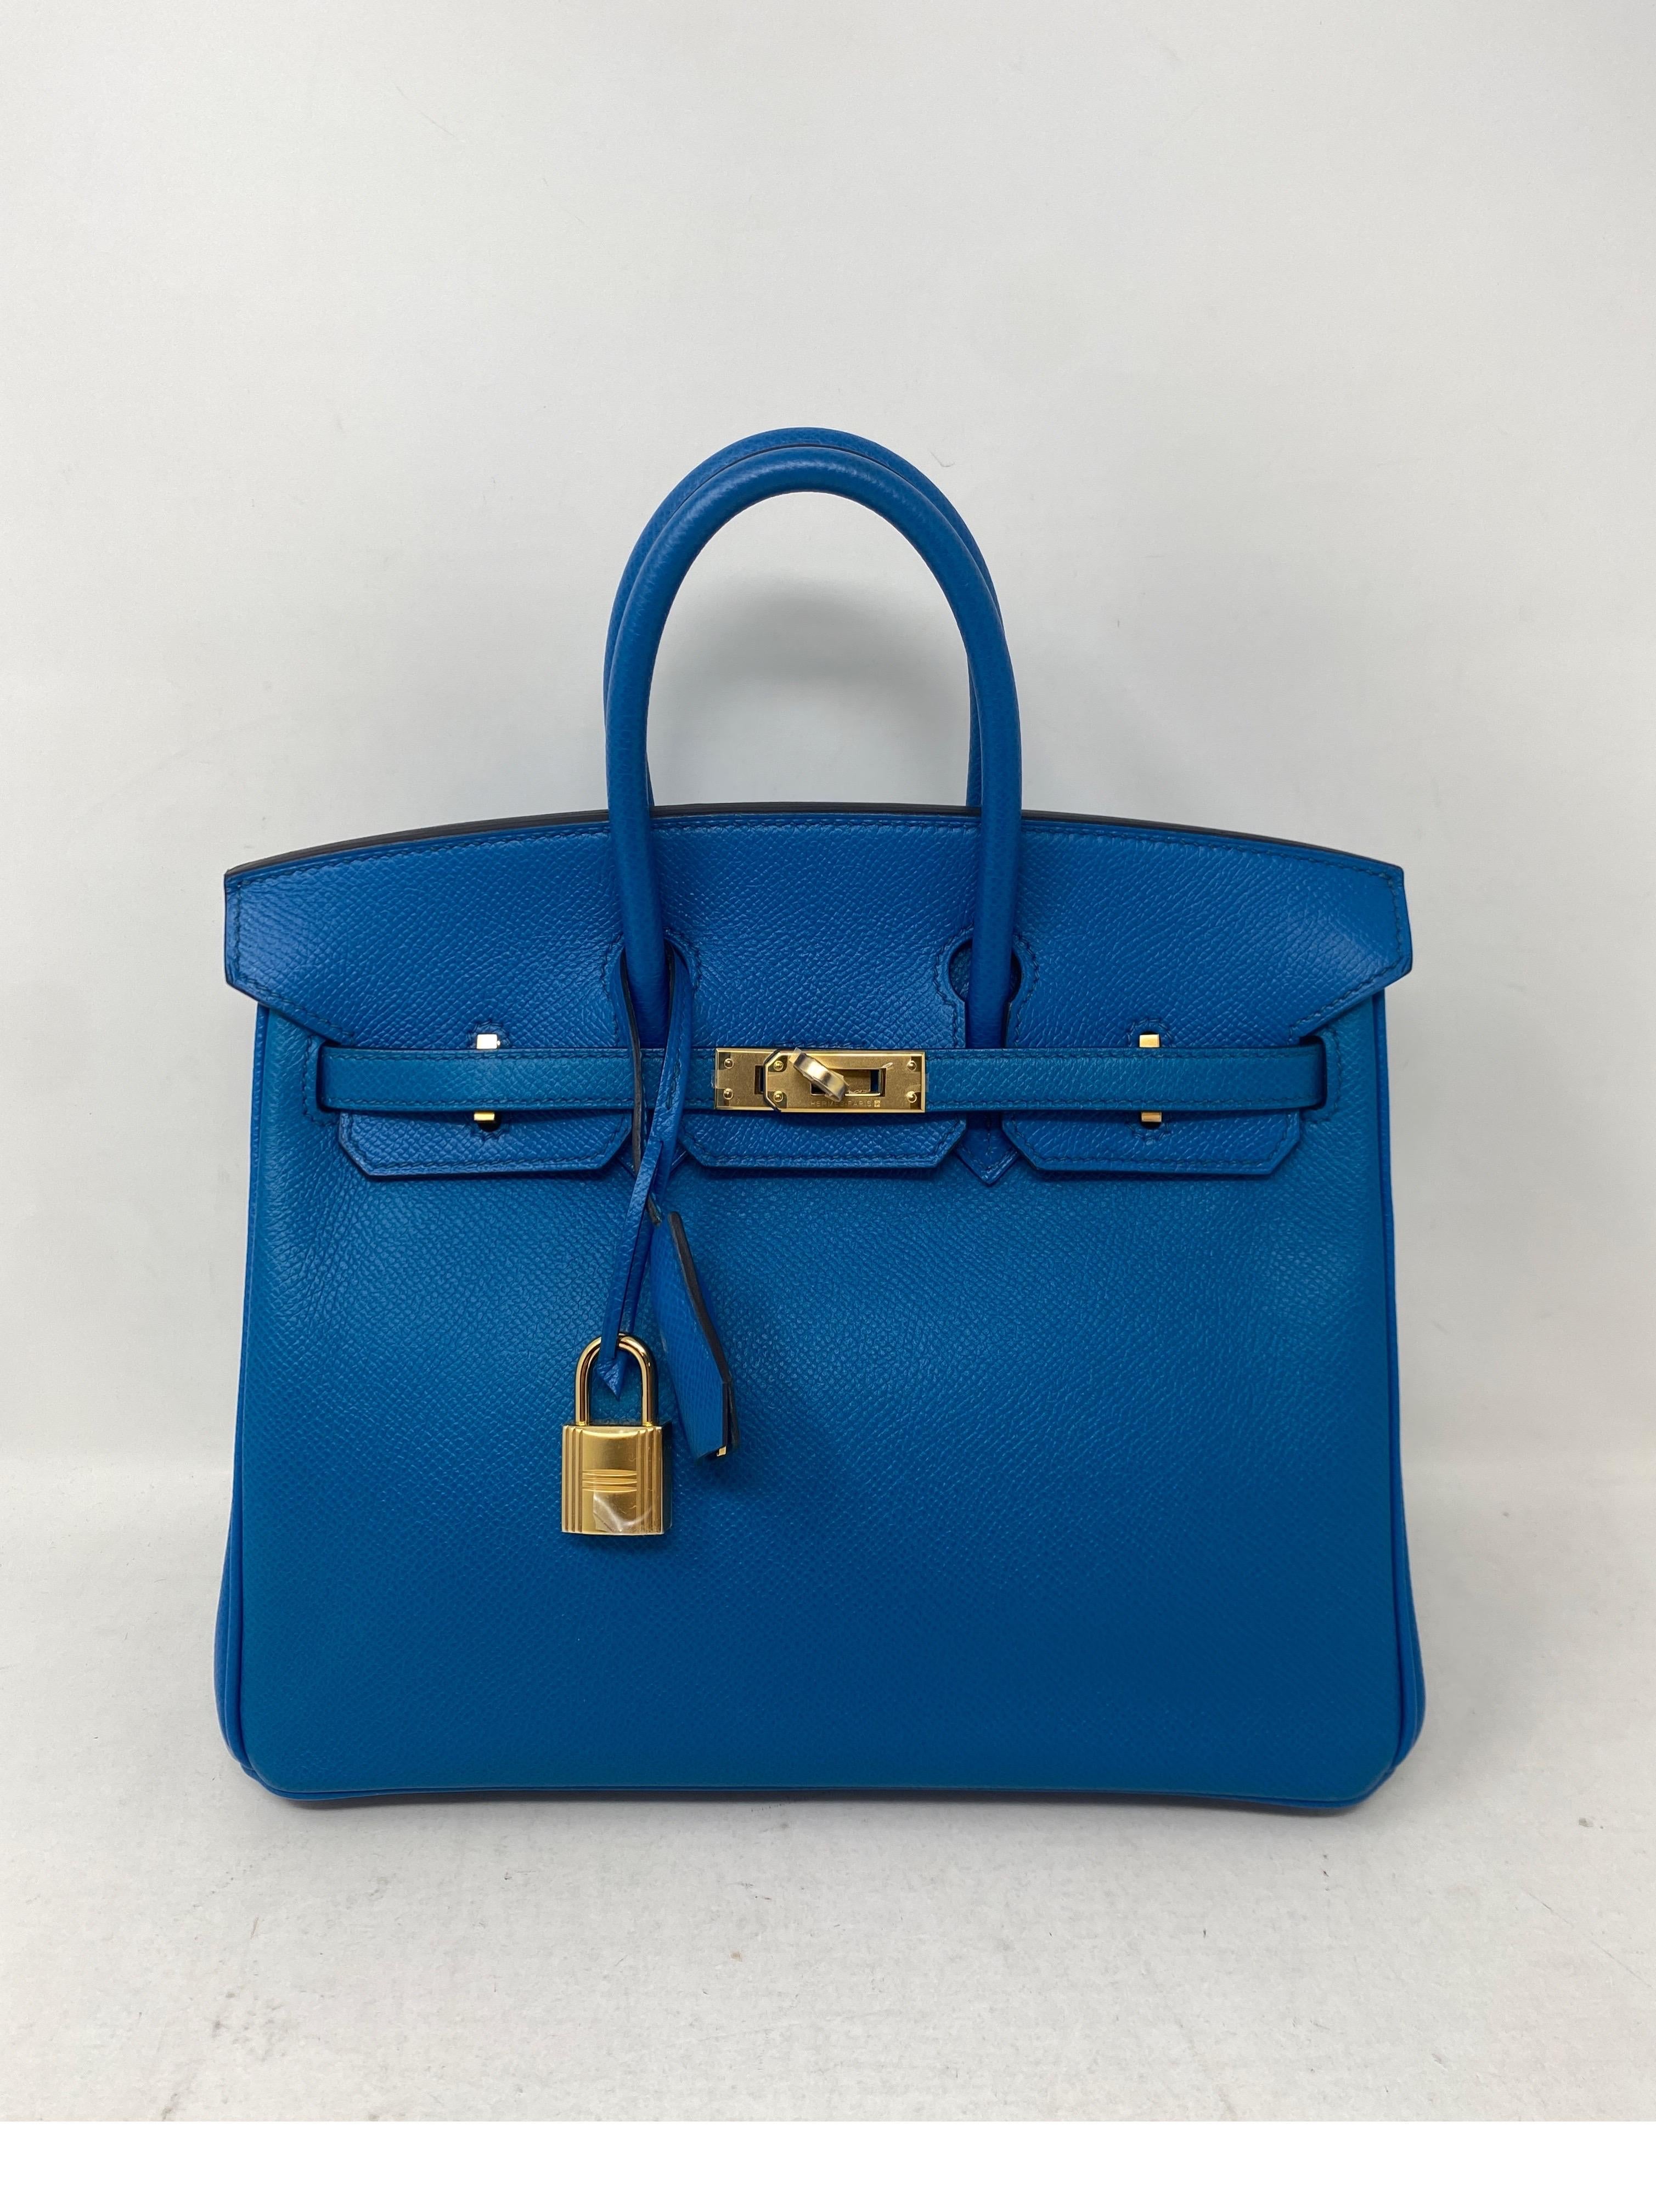 Hermes Blue Izmir Birkin 25 Bag. Excellent like new condition. Looks like new. Rare blue vibrant color bag. Unicorn 25 size. Gold hardware. Epsom leather. Includes clochette, lock, keys, and dust bag. Guaranteed authentic. 